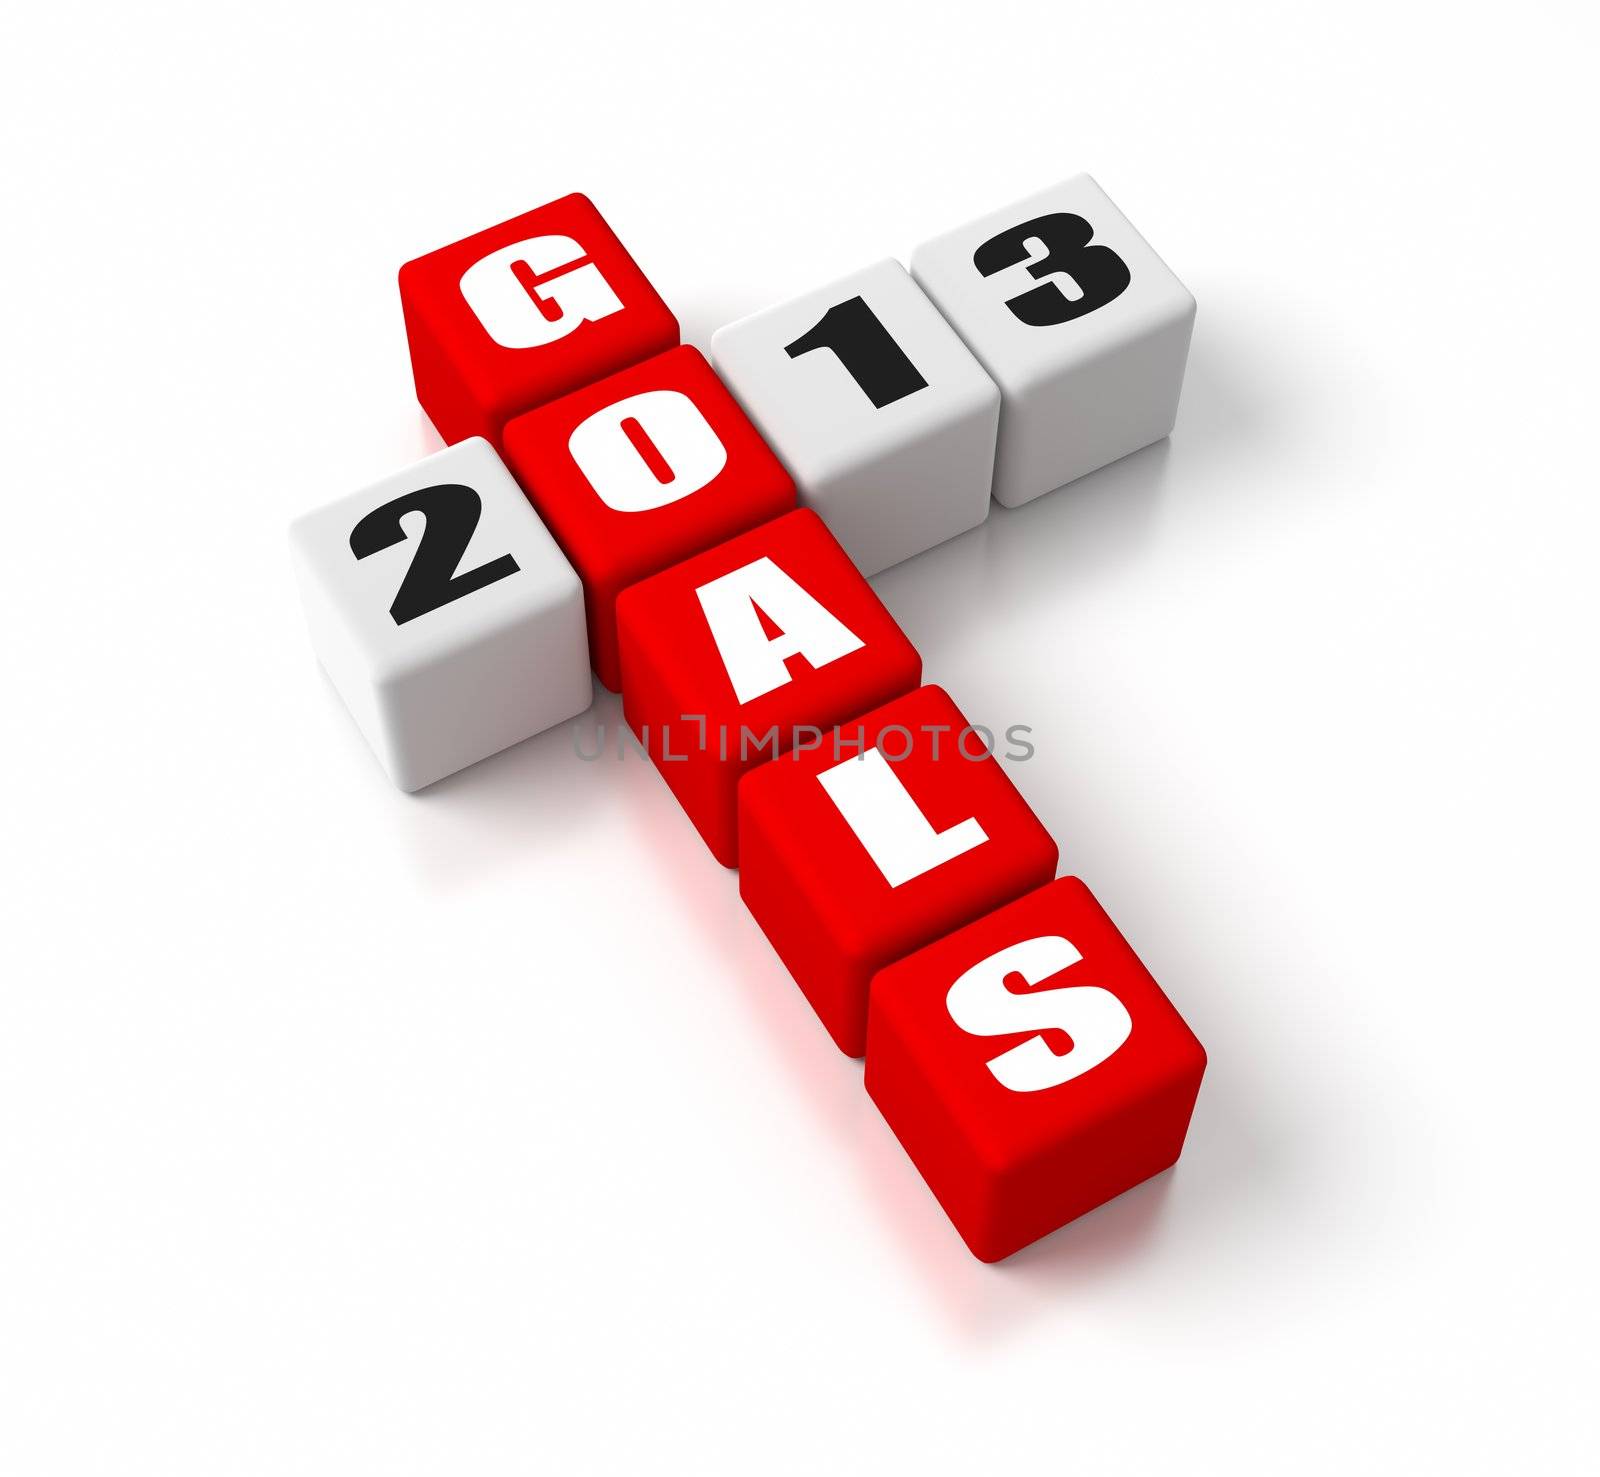 Goals For 2013 crosswords. Part of a business concepts series.